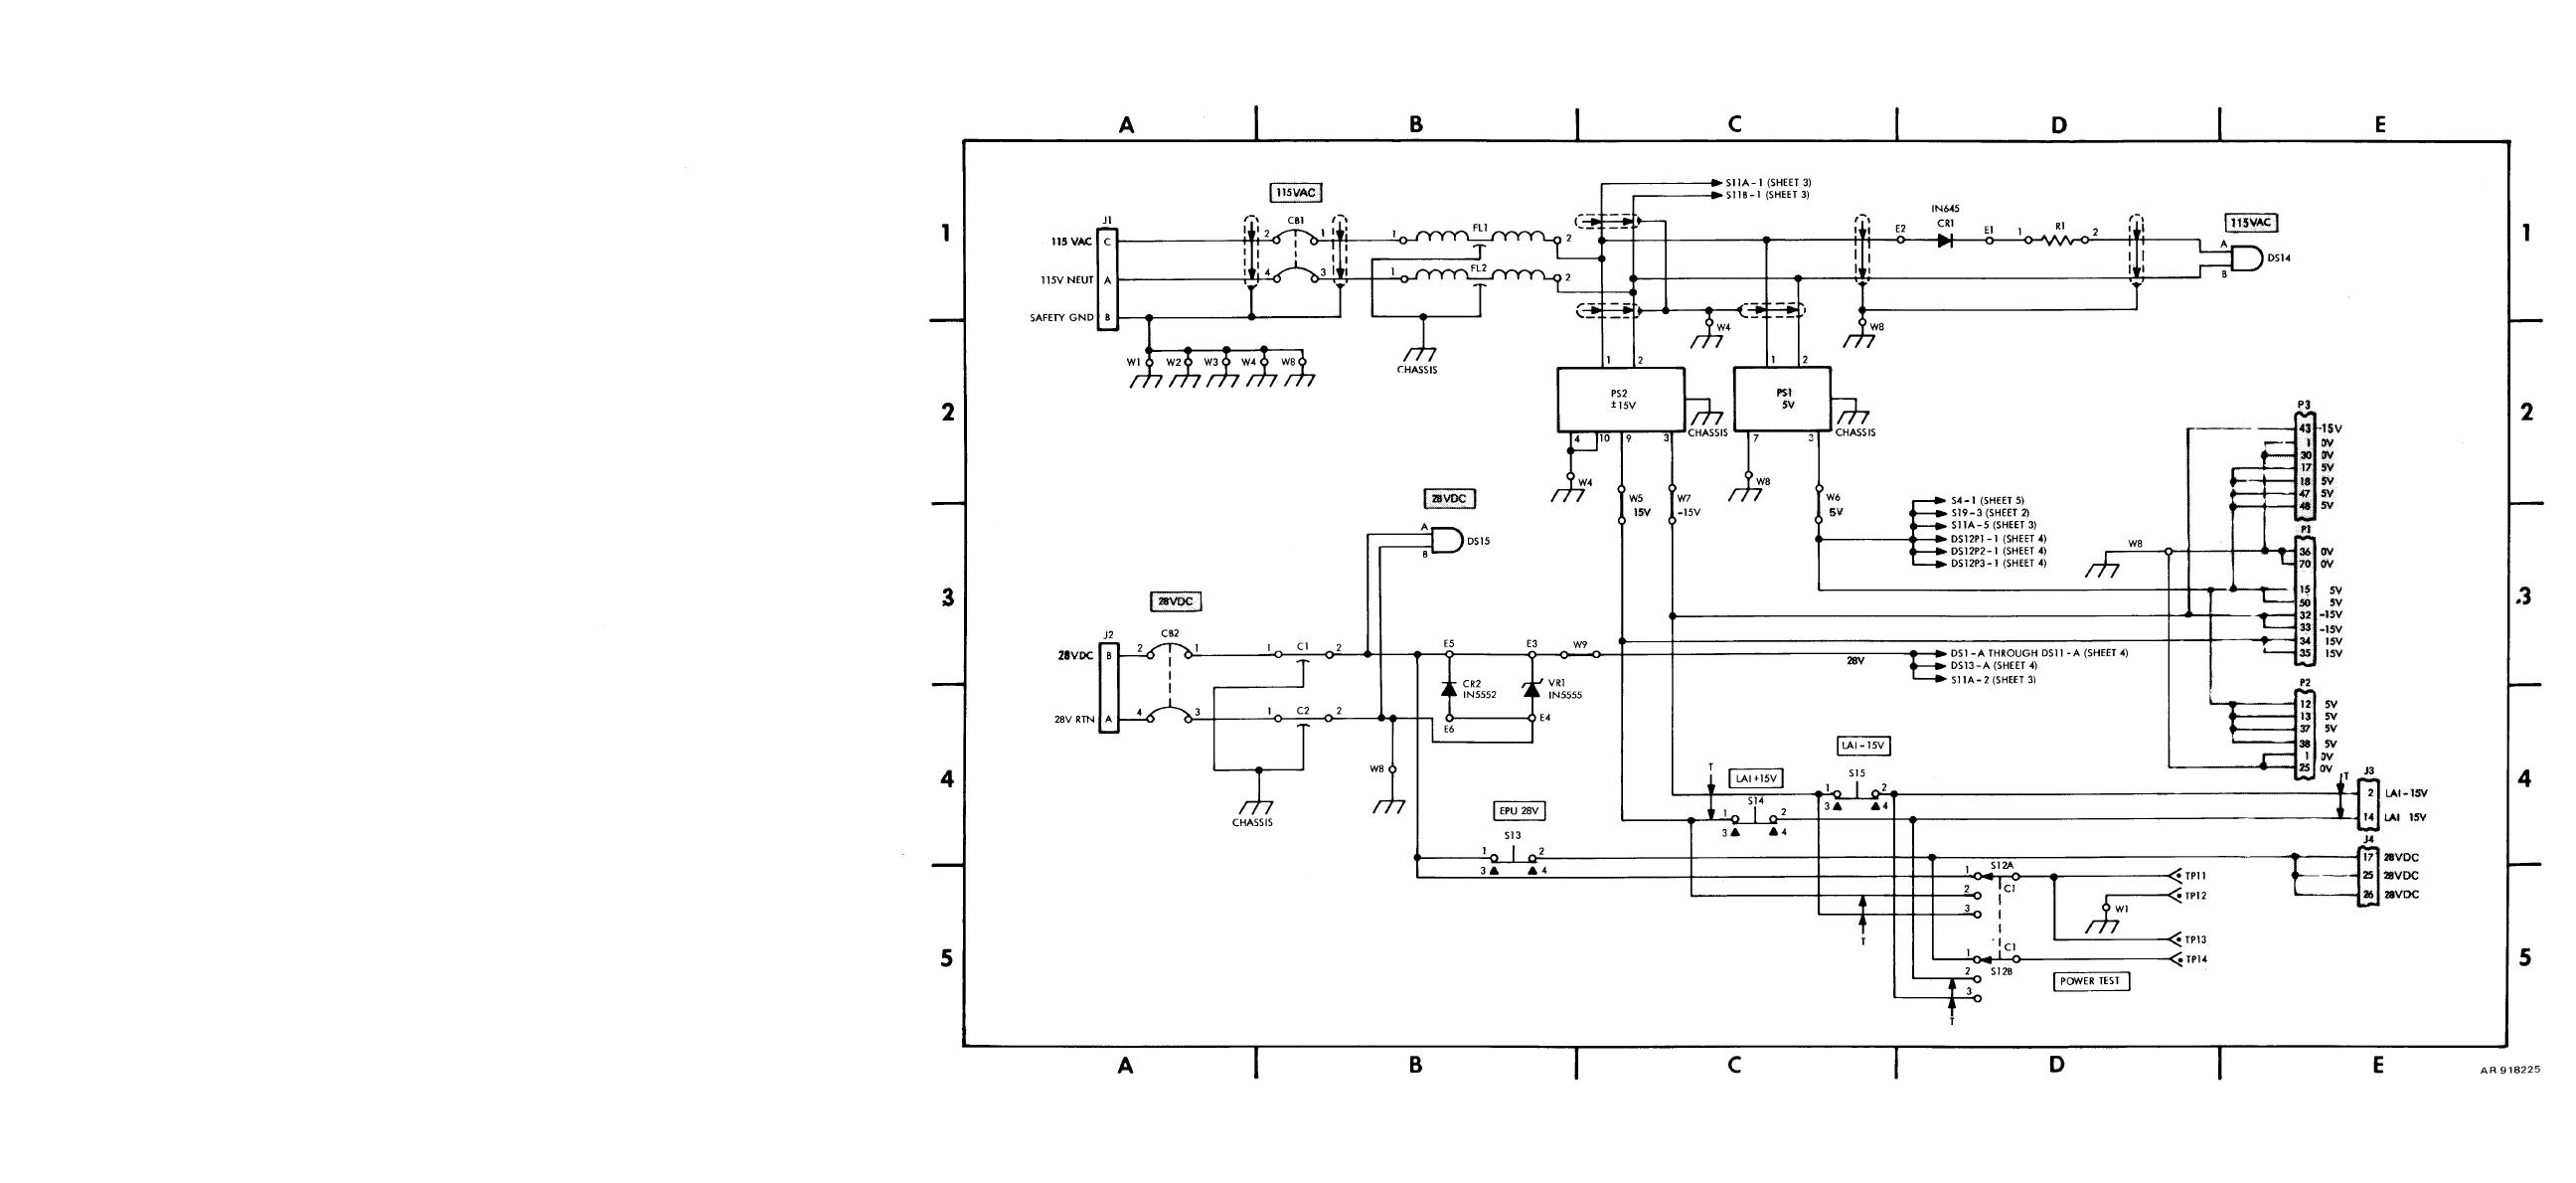 Figure FO-1. Wiring Schematic (Sheet 1 of 5)